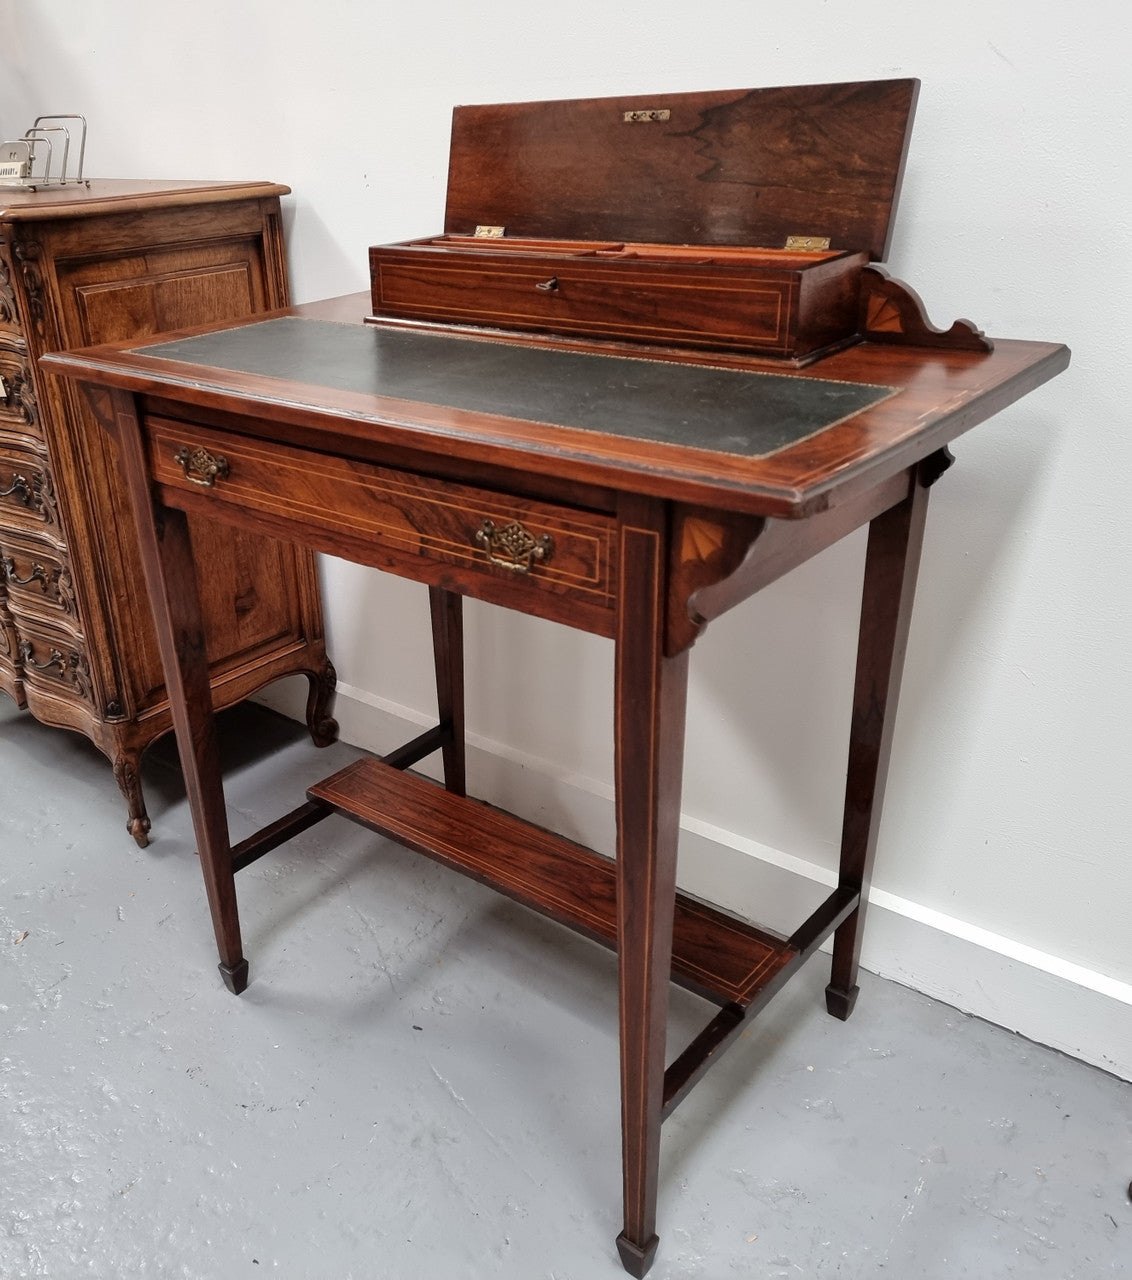 Edwardian Sheraton style desk with a tooled leather insert top with beautiful marquetry inlay. In good original detailed condition. Circa: 1910's